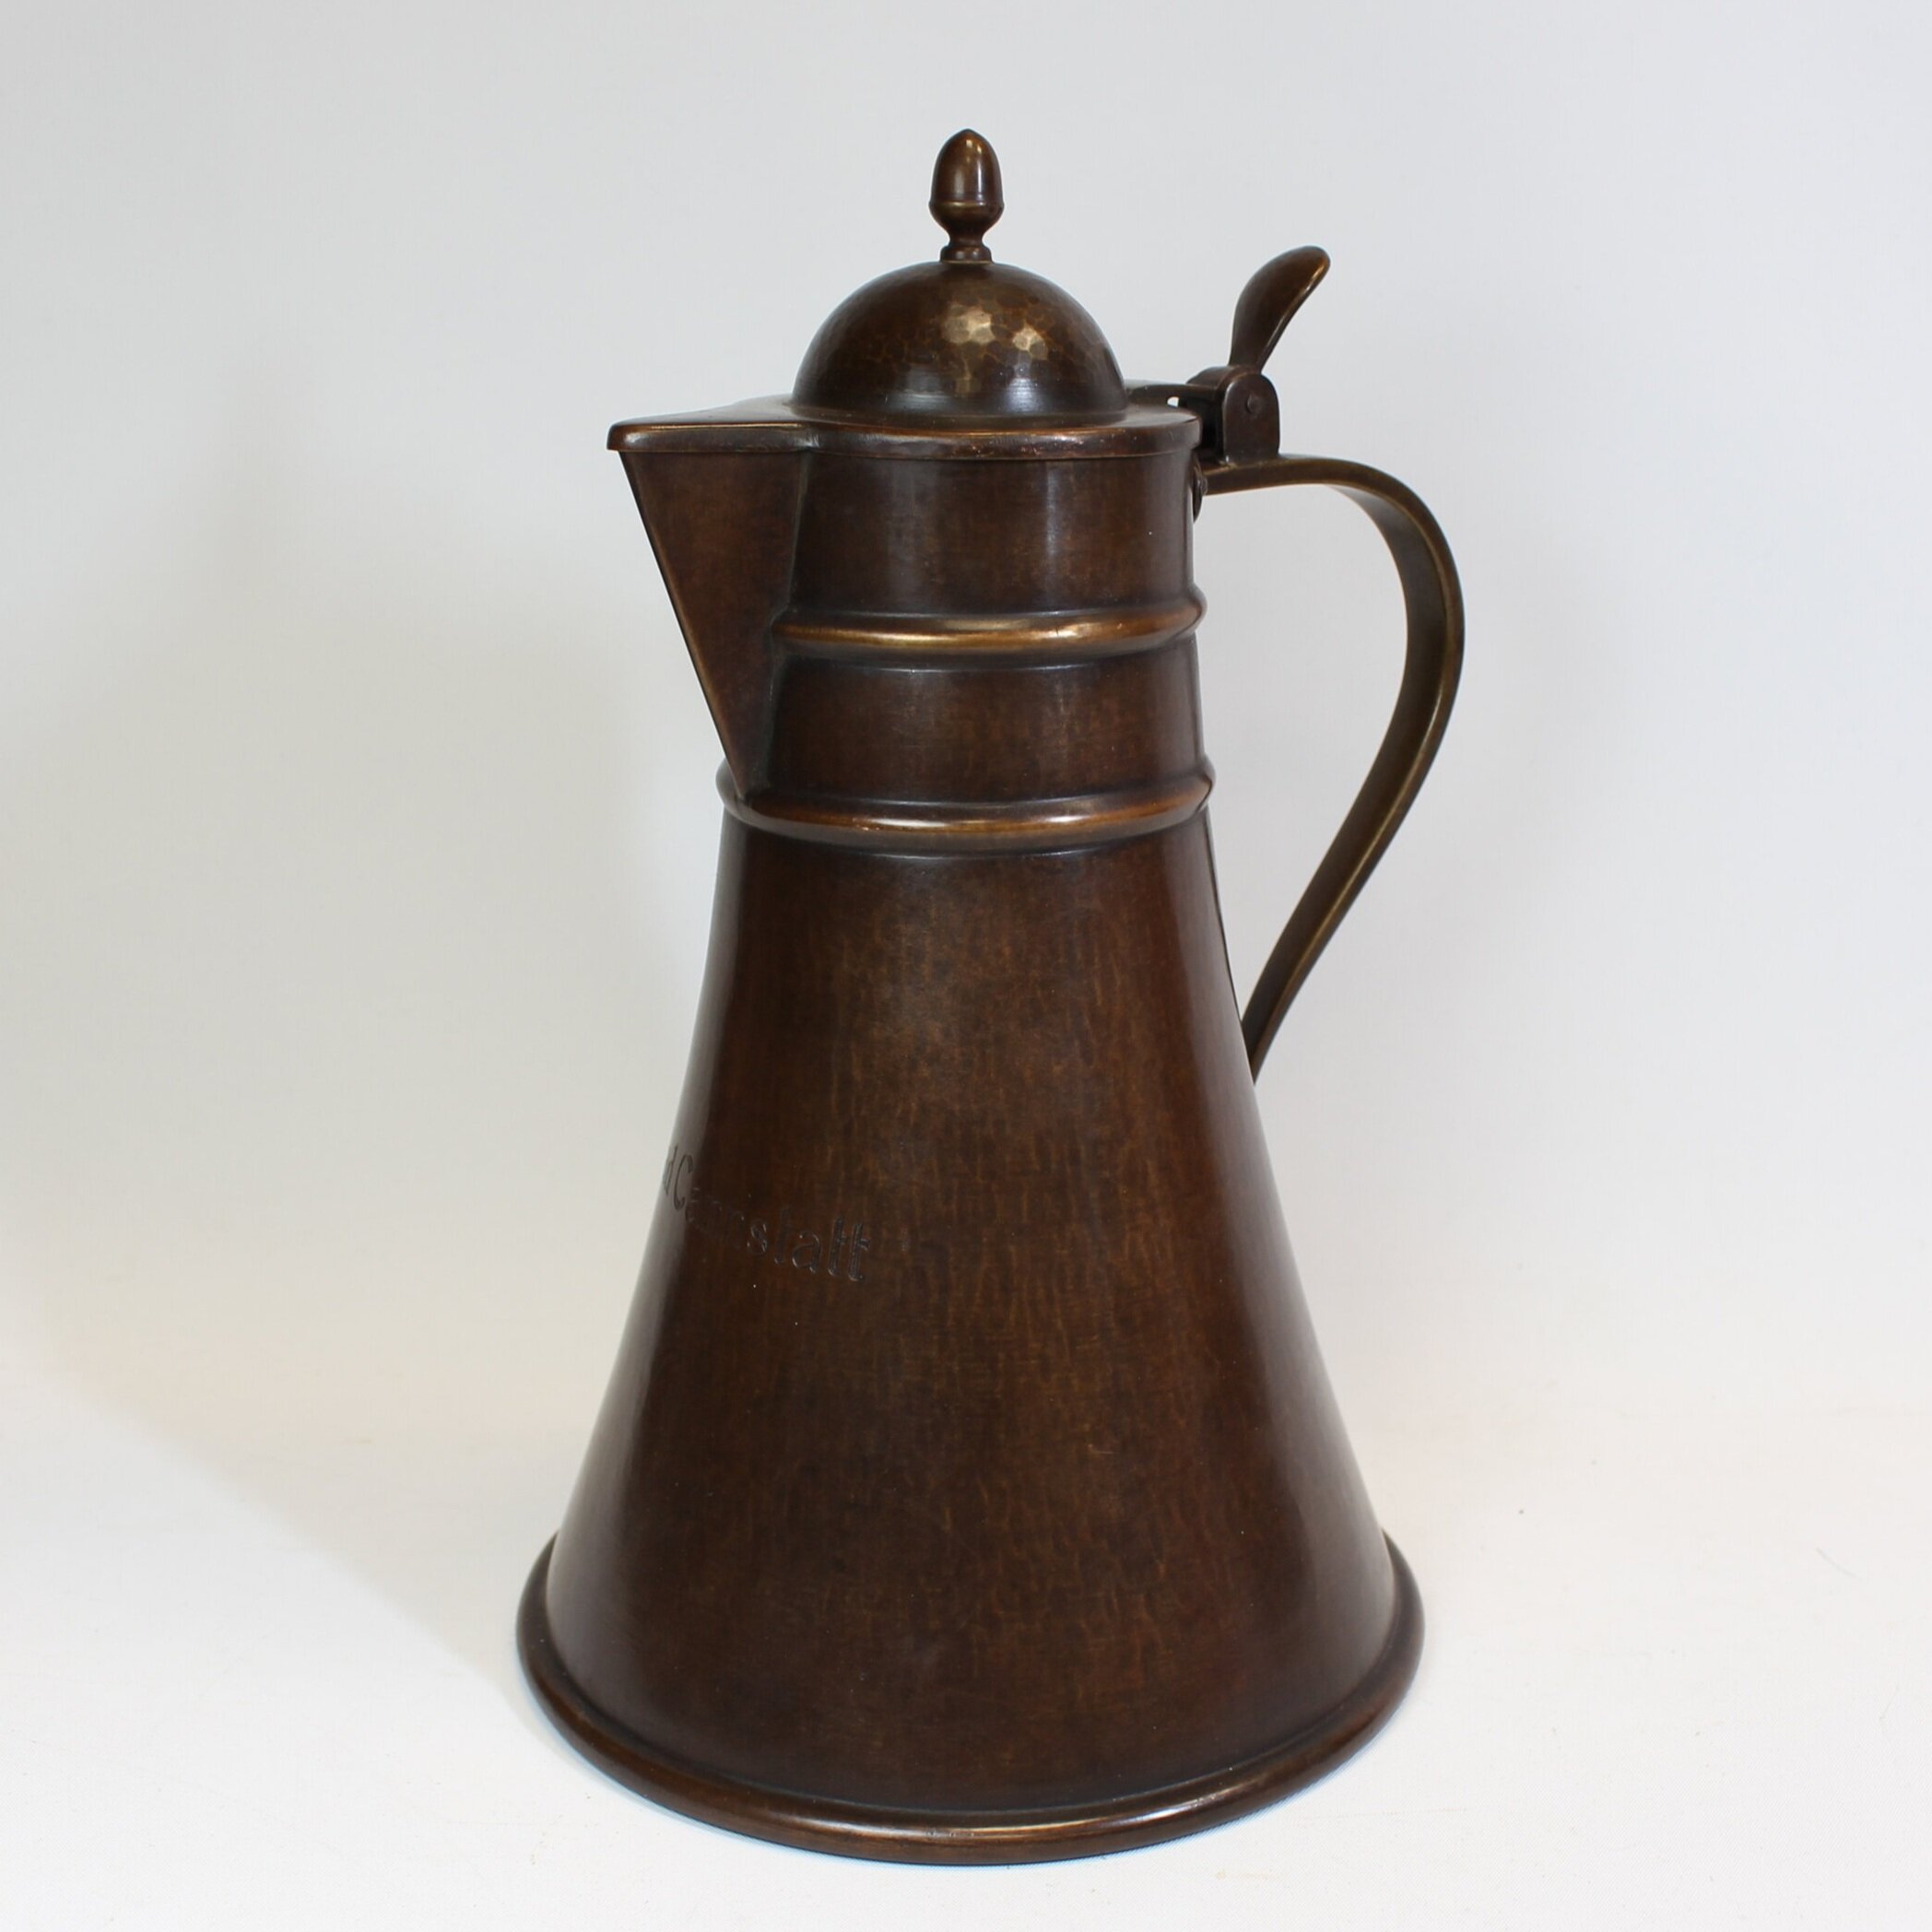 SOLD, Paul Arnold Lidded Pitcher